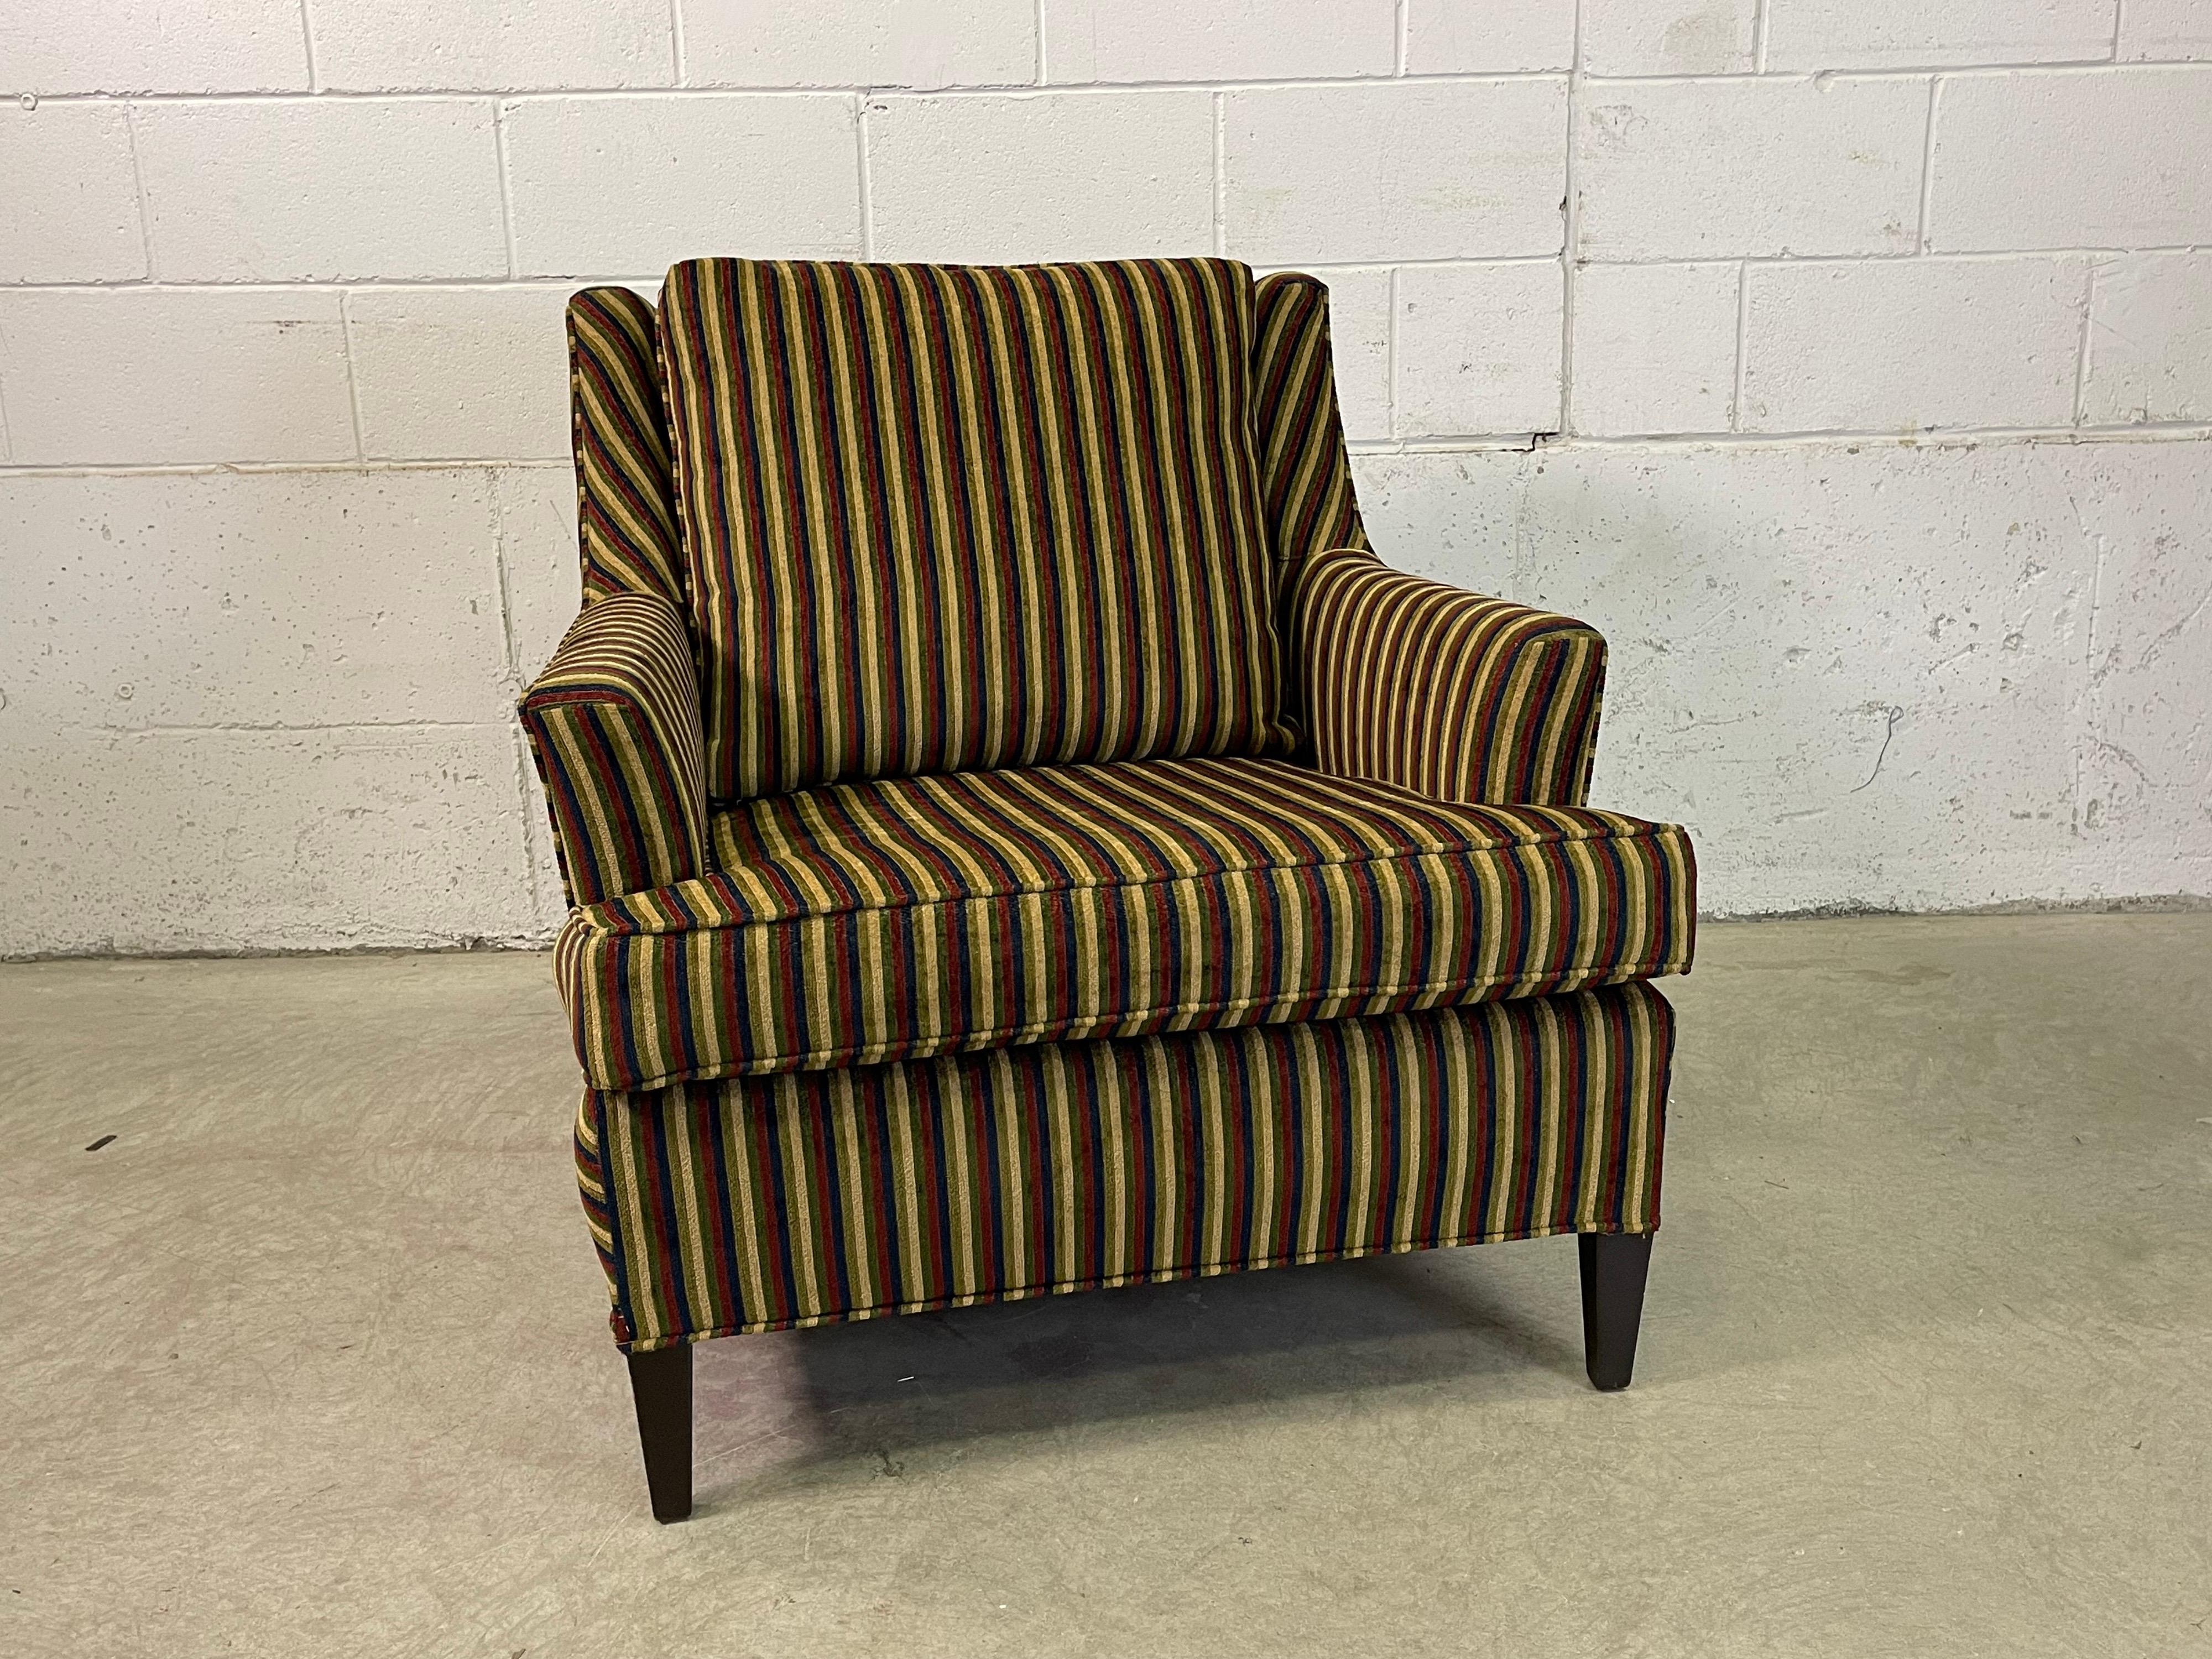 Vintage 1960s armed lounge chair with new striped fabric upholstery. The chair is sturdy and comfortable with new foam seating. Arms and back have a slight curve design. The feet are a square wood style. Seat 17.5” H. No marks.